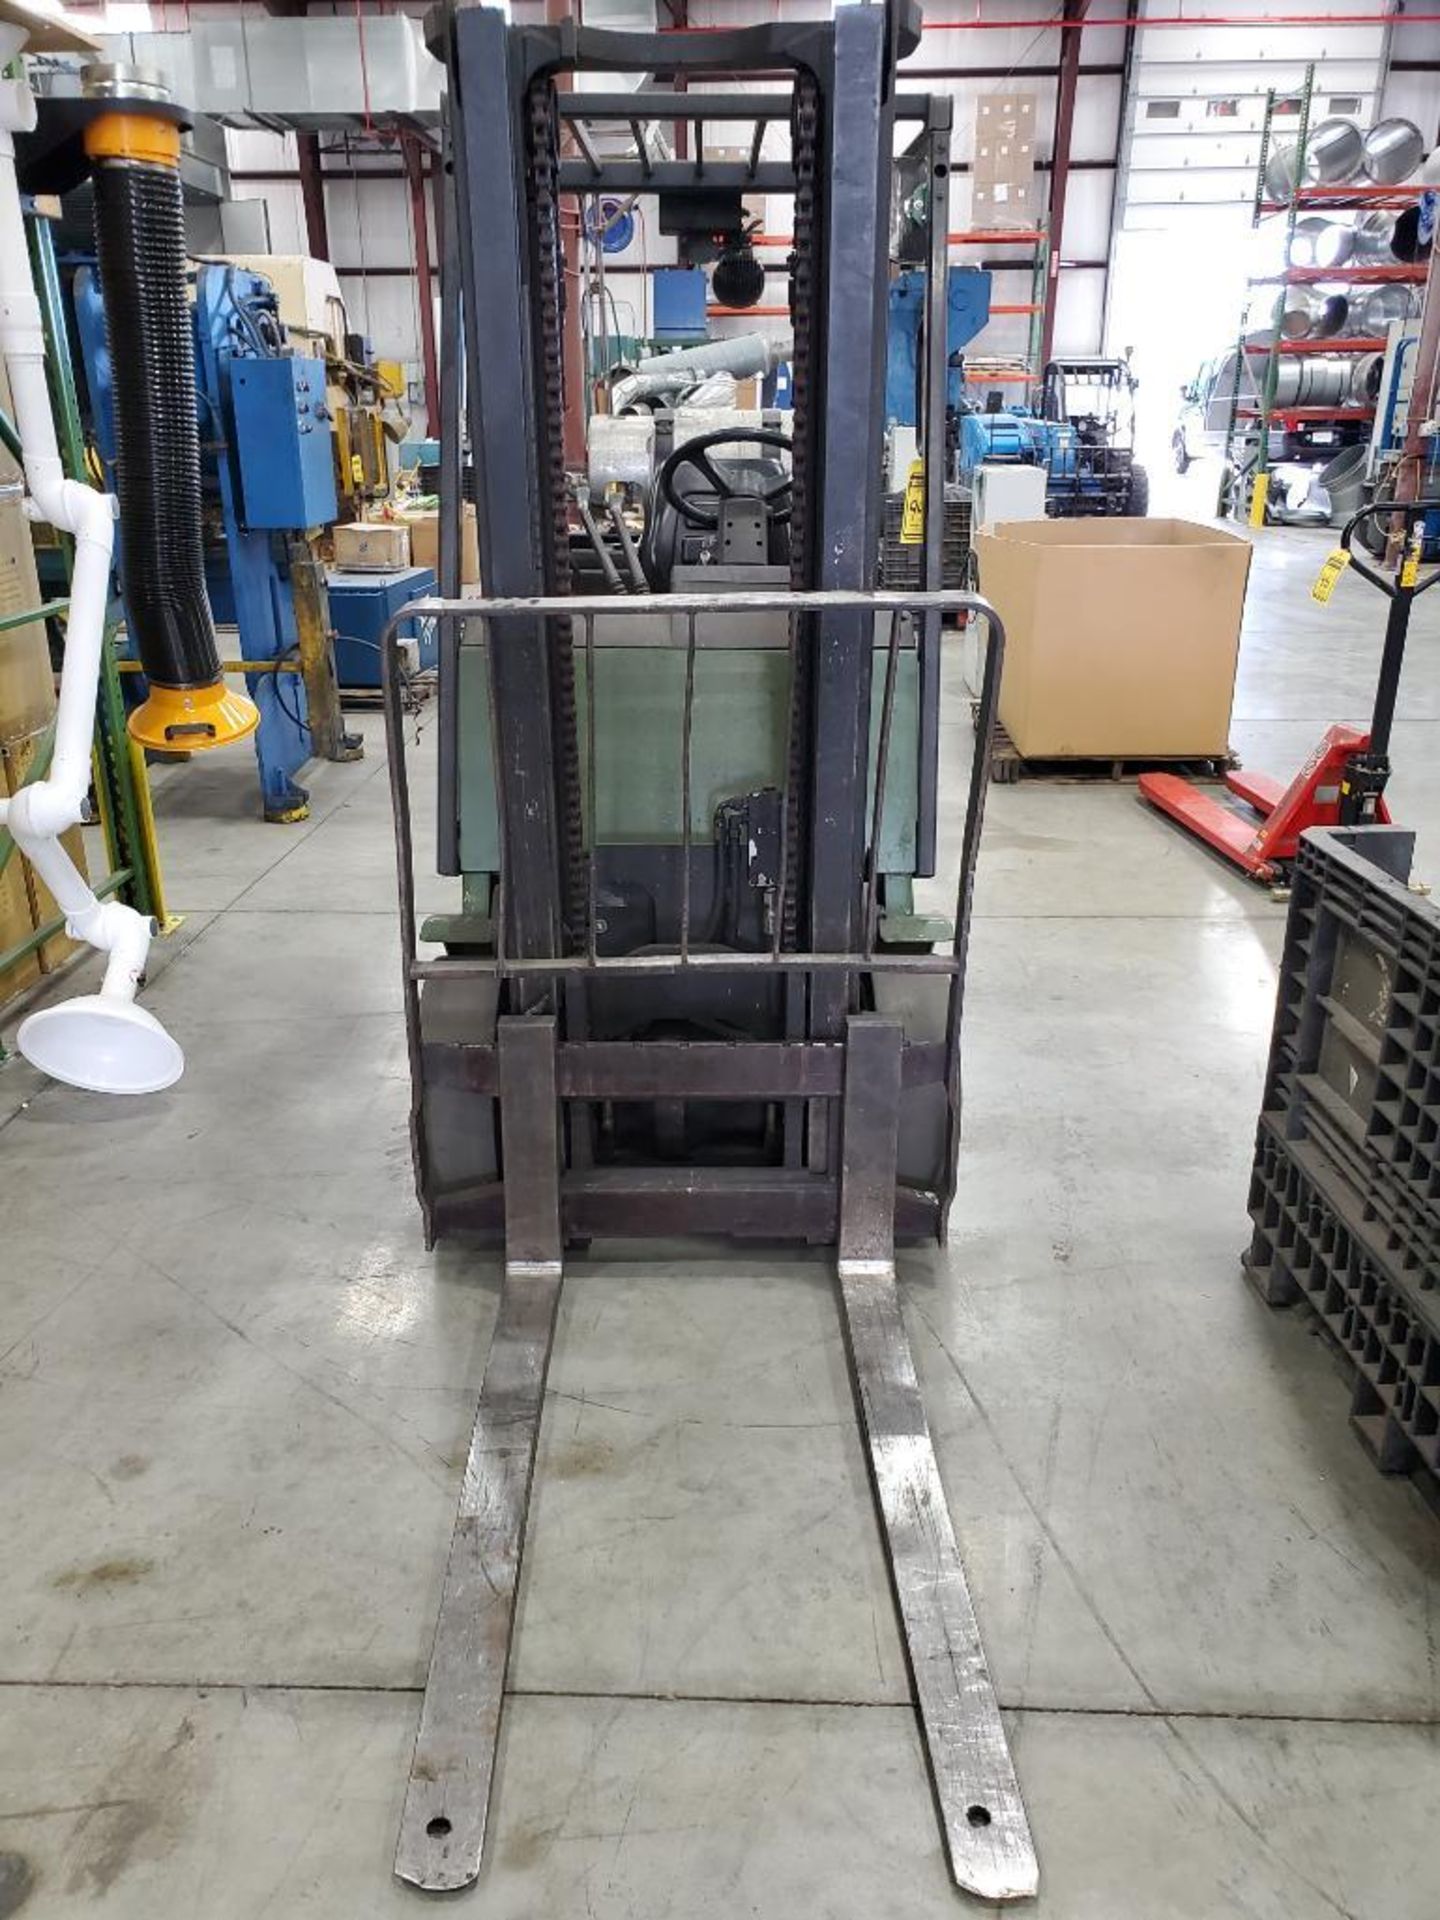 Clark 4,000 LB. Forklift, Model CGC20, S/N C365l-0052-9464FB, 130" Lift Height, 82-1/2" 2-Stage Mast - Image 3 of 10